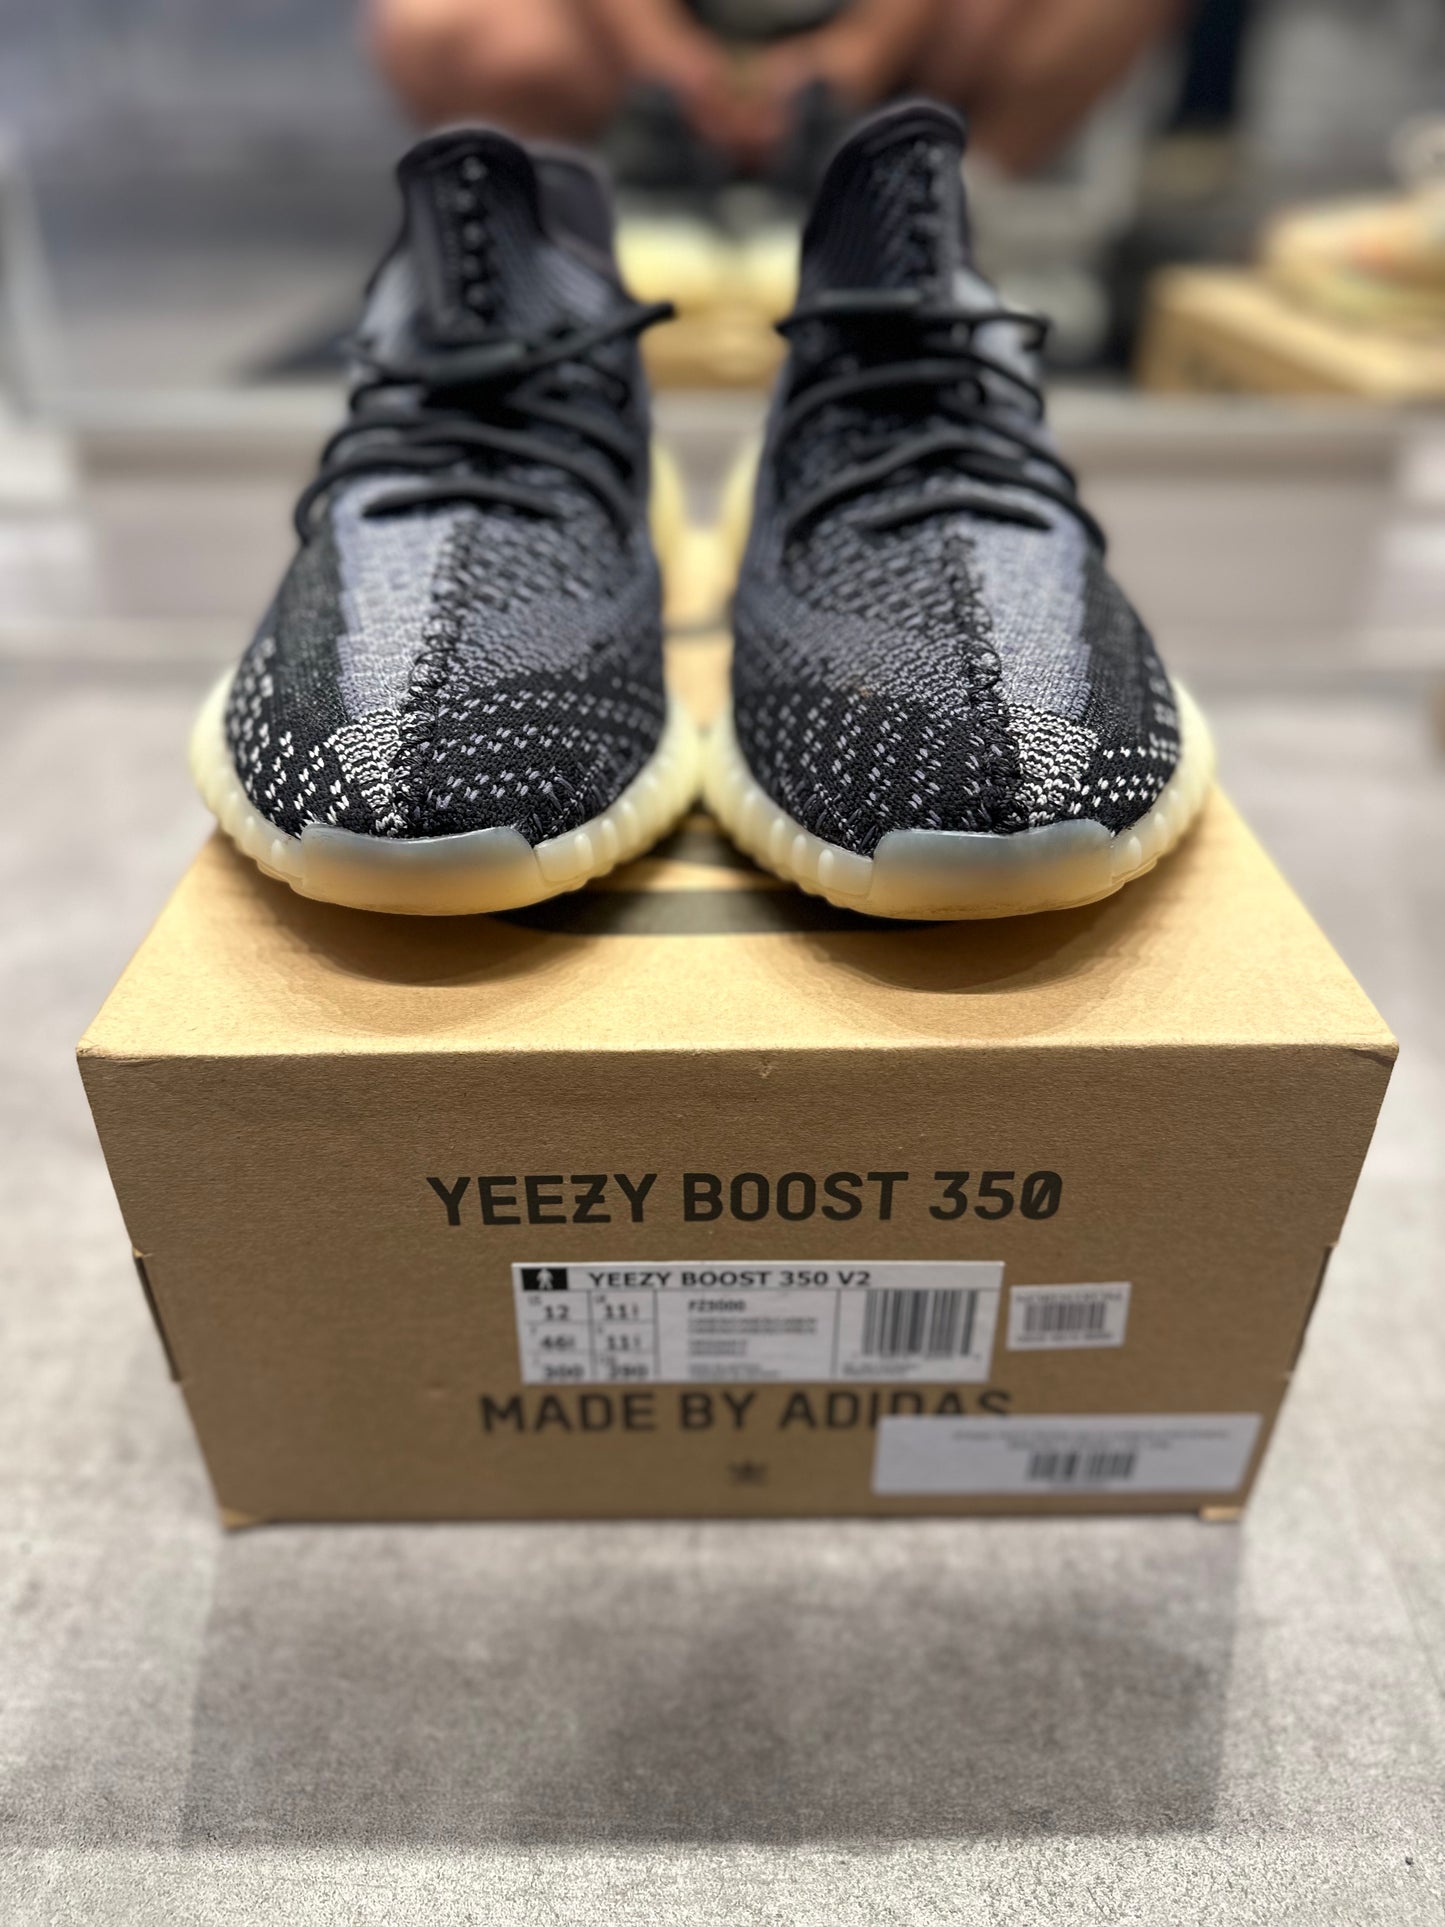 Adidas Yeezy Boost 350 V2 Carbon (Preowned Size 12)